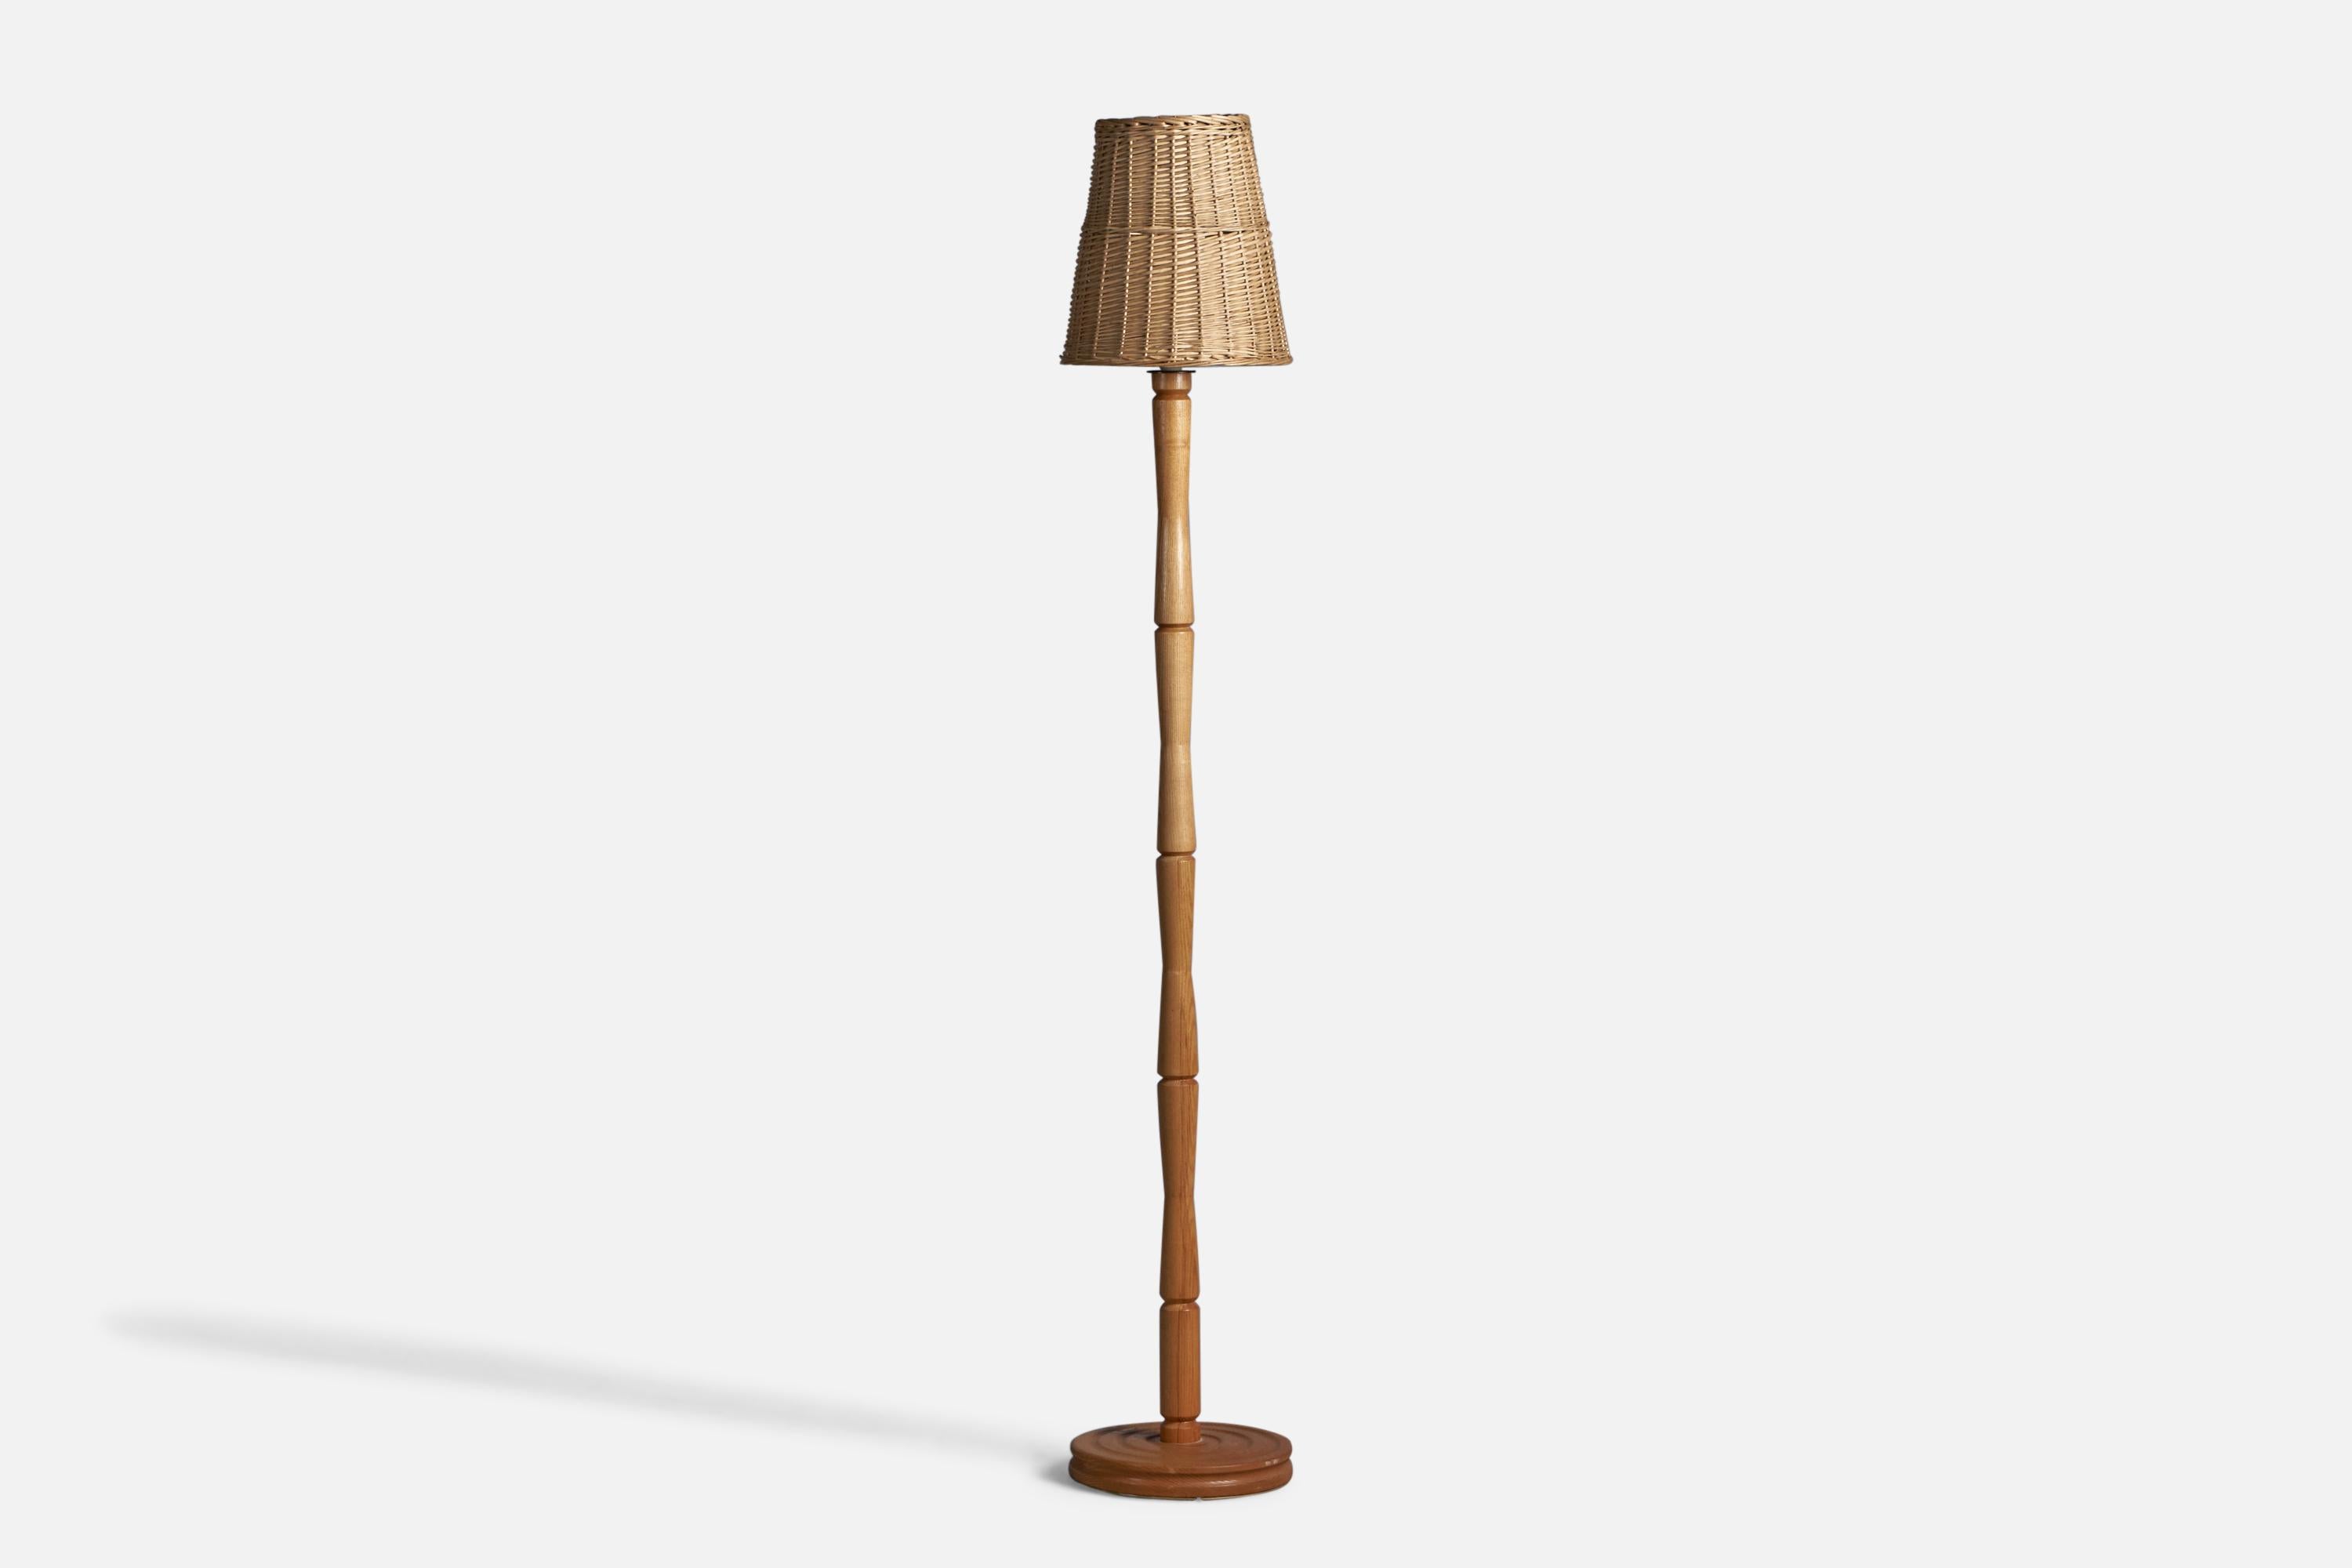 An oak and rattan floor lamp, designed and produced in Sweden, c. 1970s.

Overall Dimensions (inches): 64.5